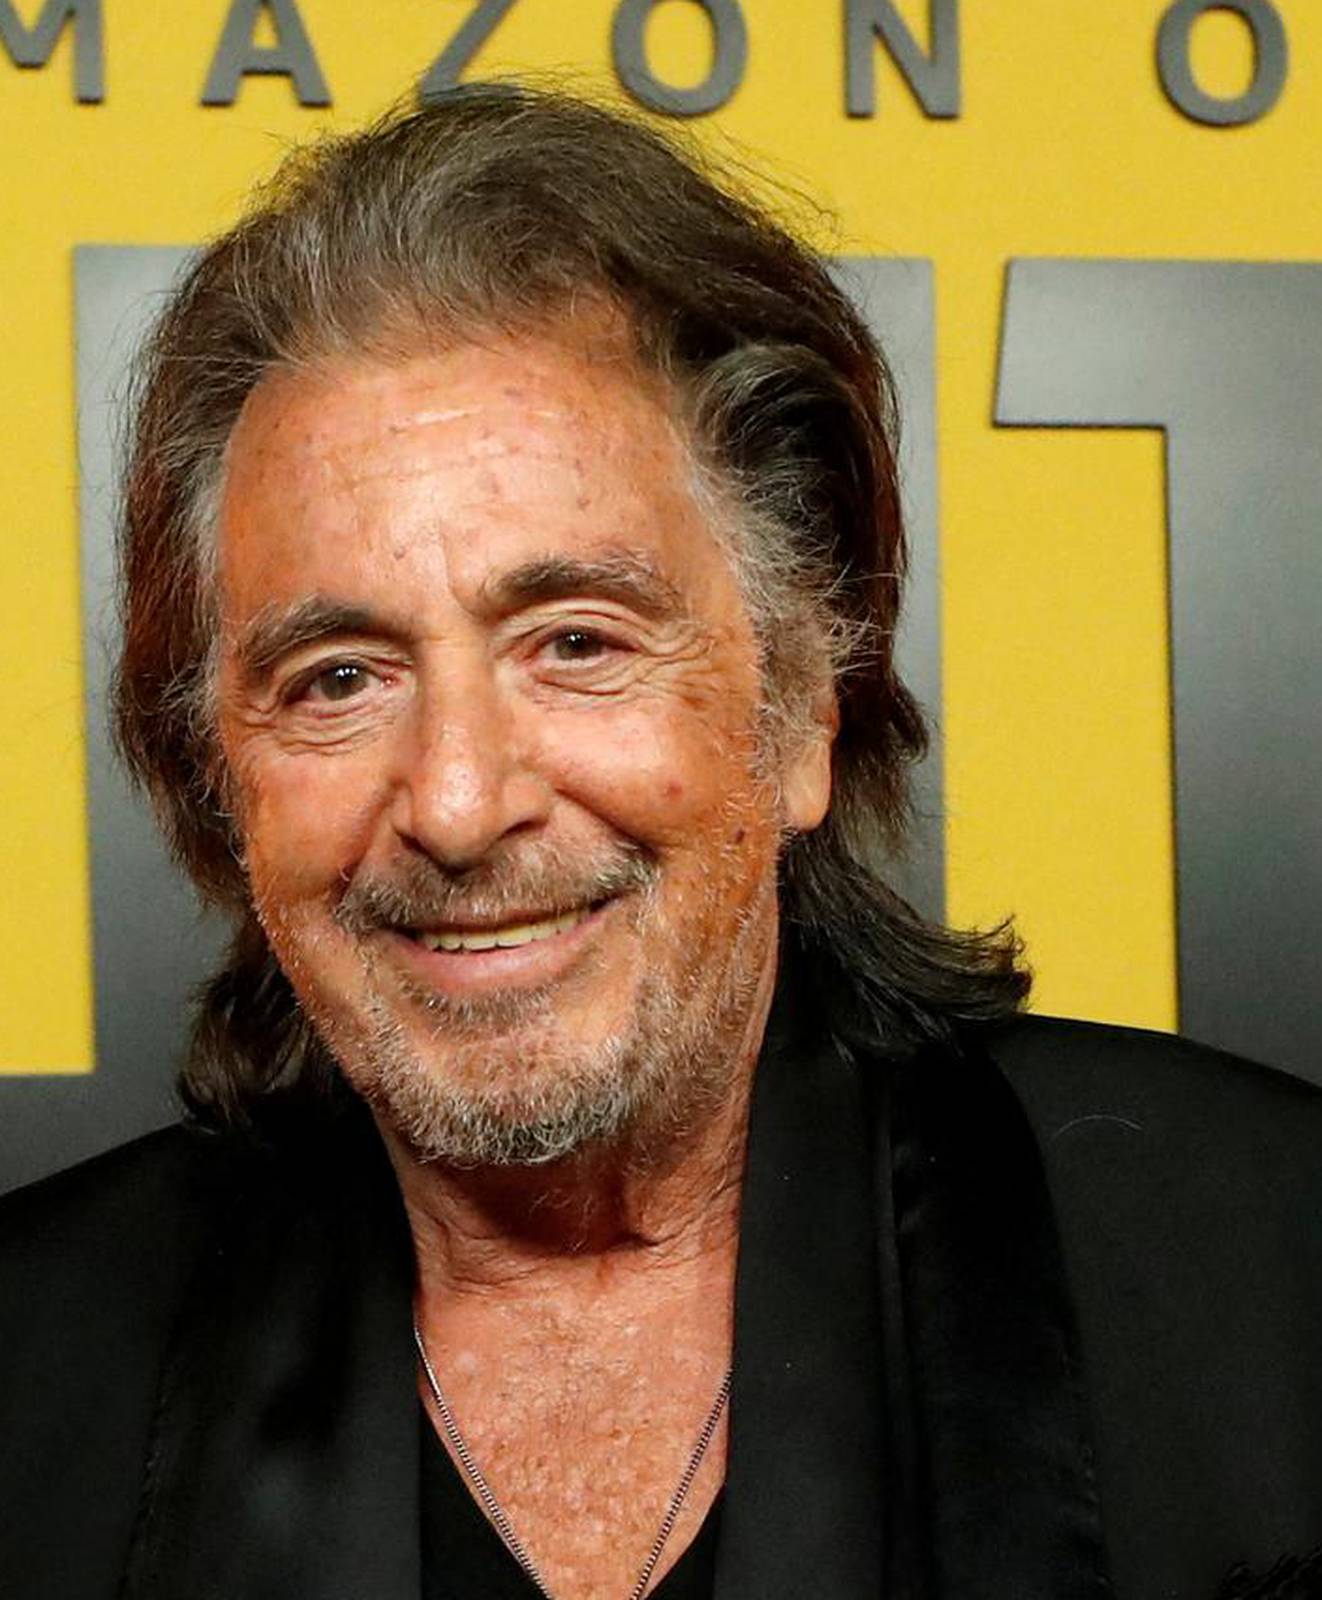 FILE PHOTO: Cast member Pacino attends a premiere for the television series "Hunters" in Los Angeles